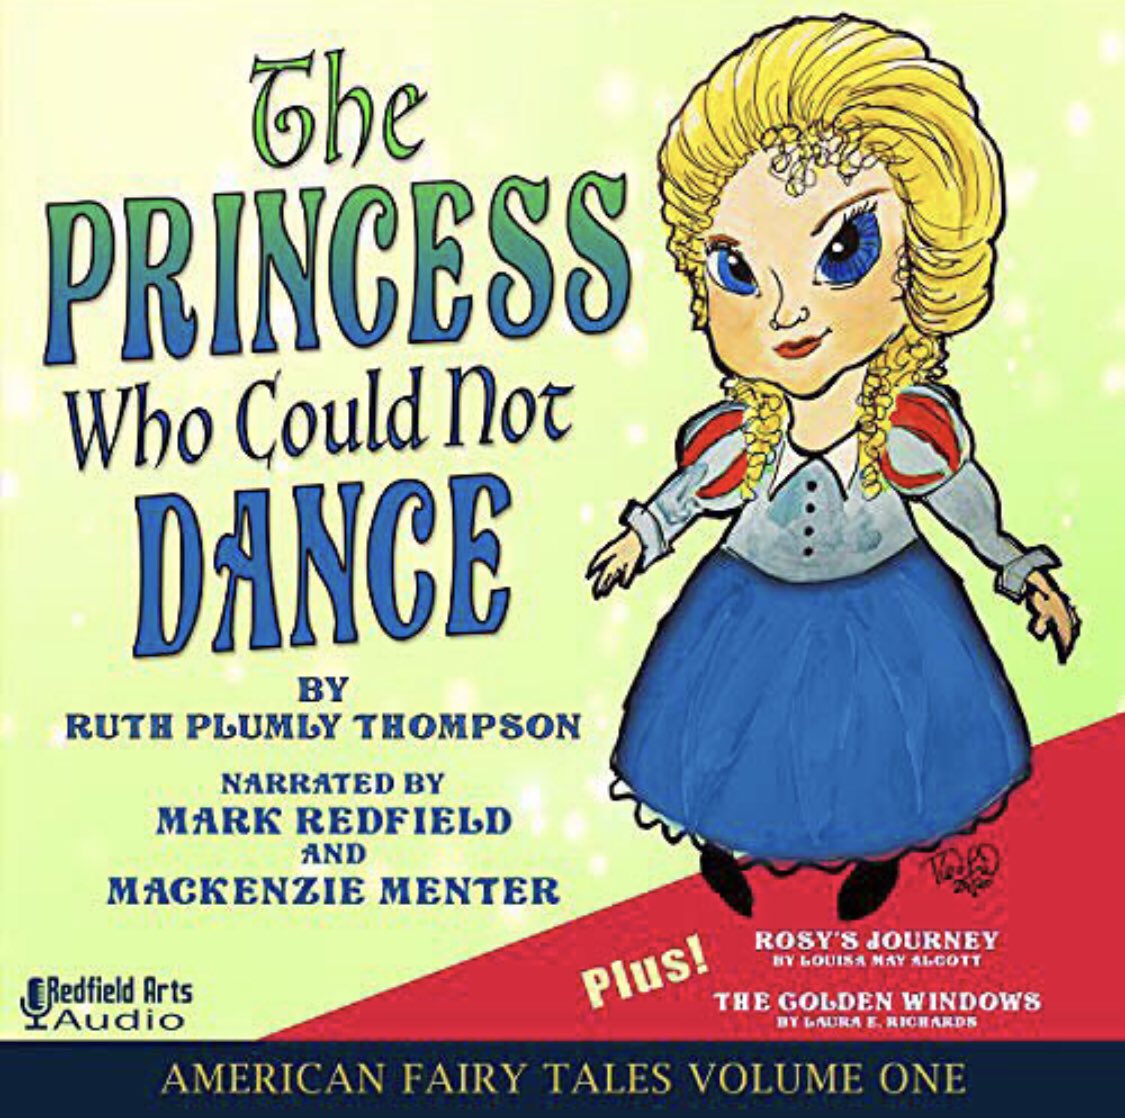 #worldprincessweek 
“The Princess Who Could Not Dance” Audible worldwide. 

audible.com/pd/The-Princes…

Narrated by Mark Redfield & Mackenzie Menter
RedfieldArtsAudio.com
#FairyTales #ChildrensAudio #AmericanFairyTales #Princess